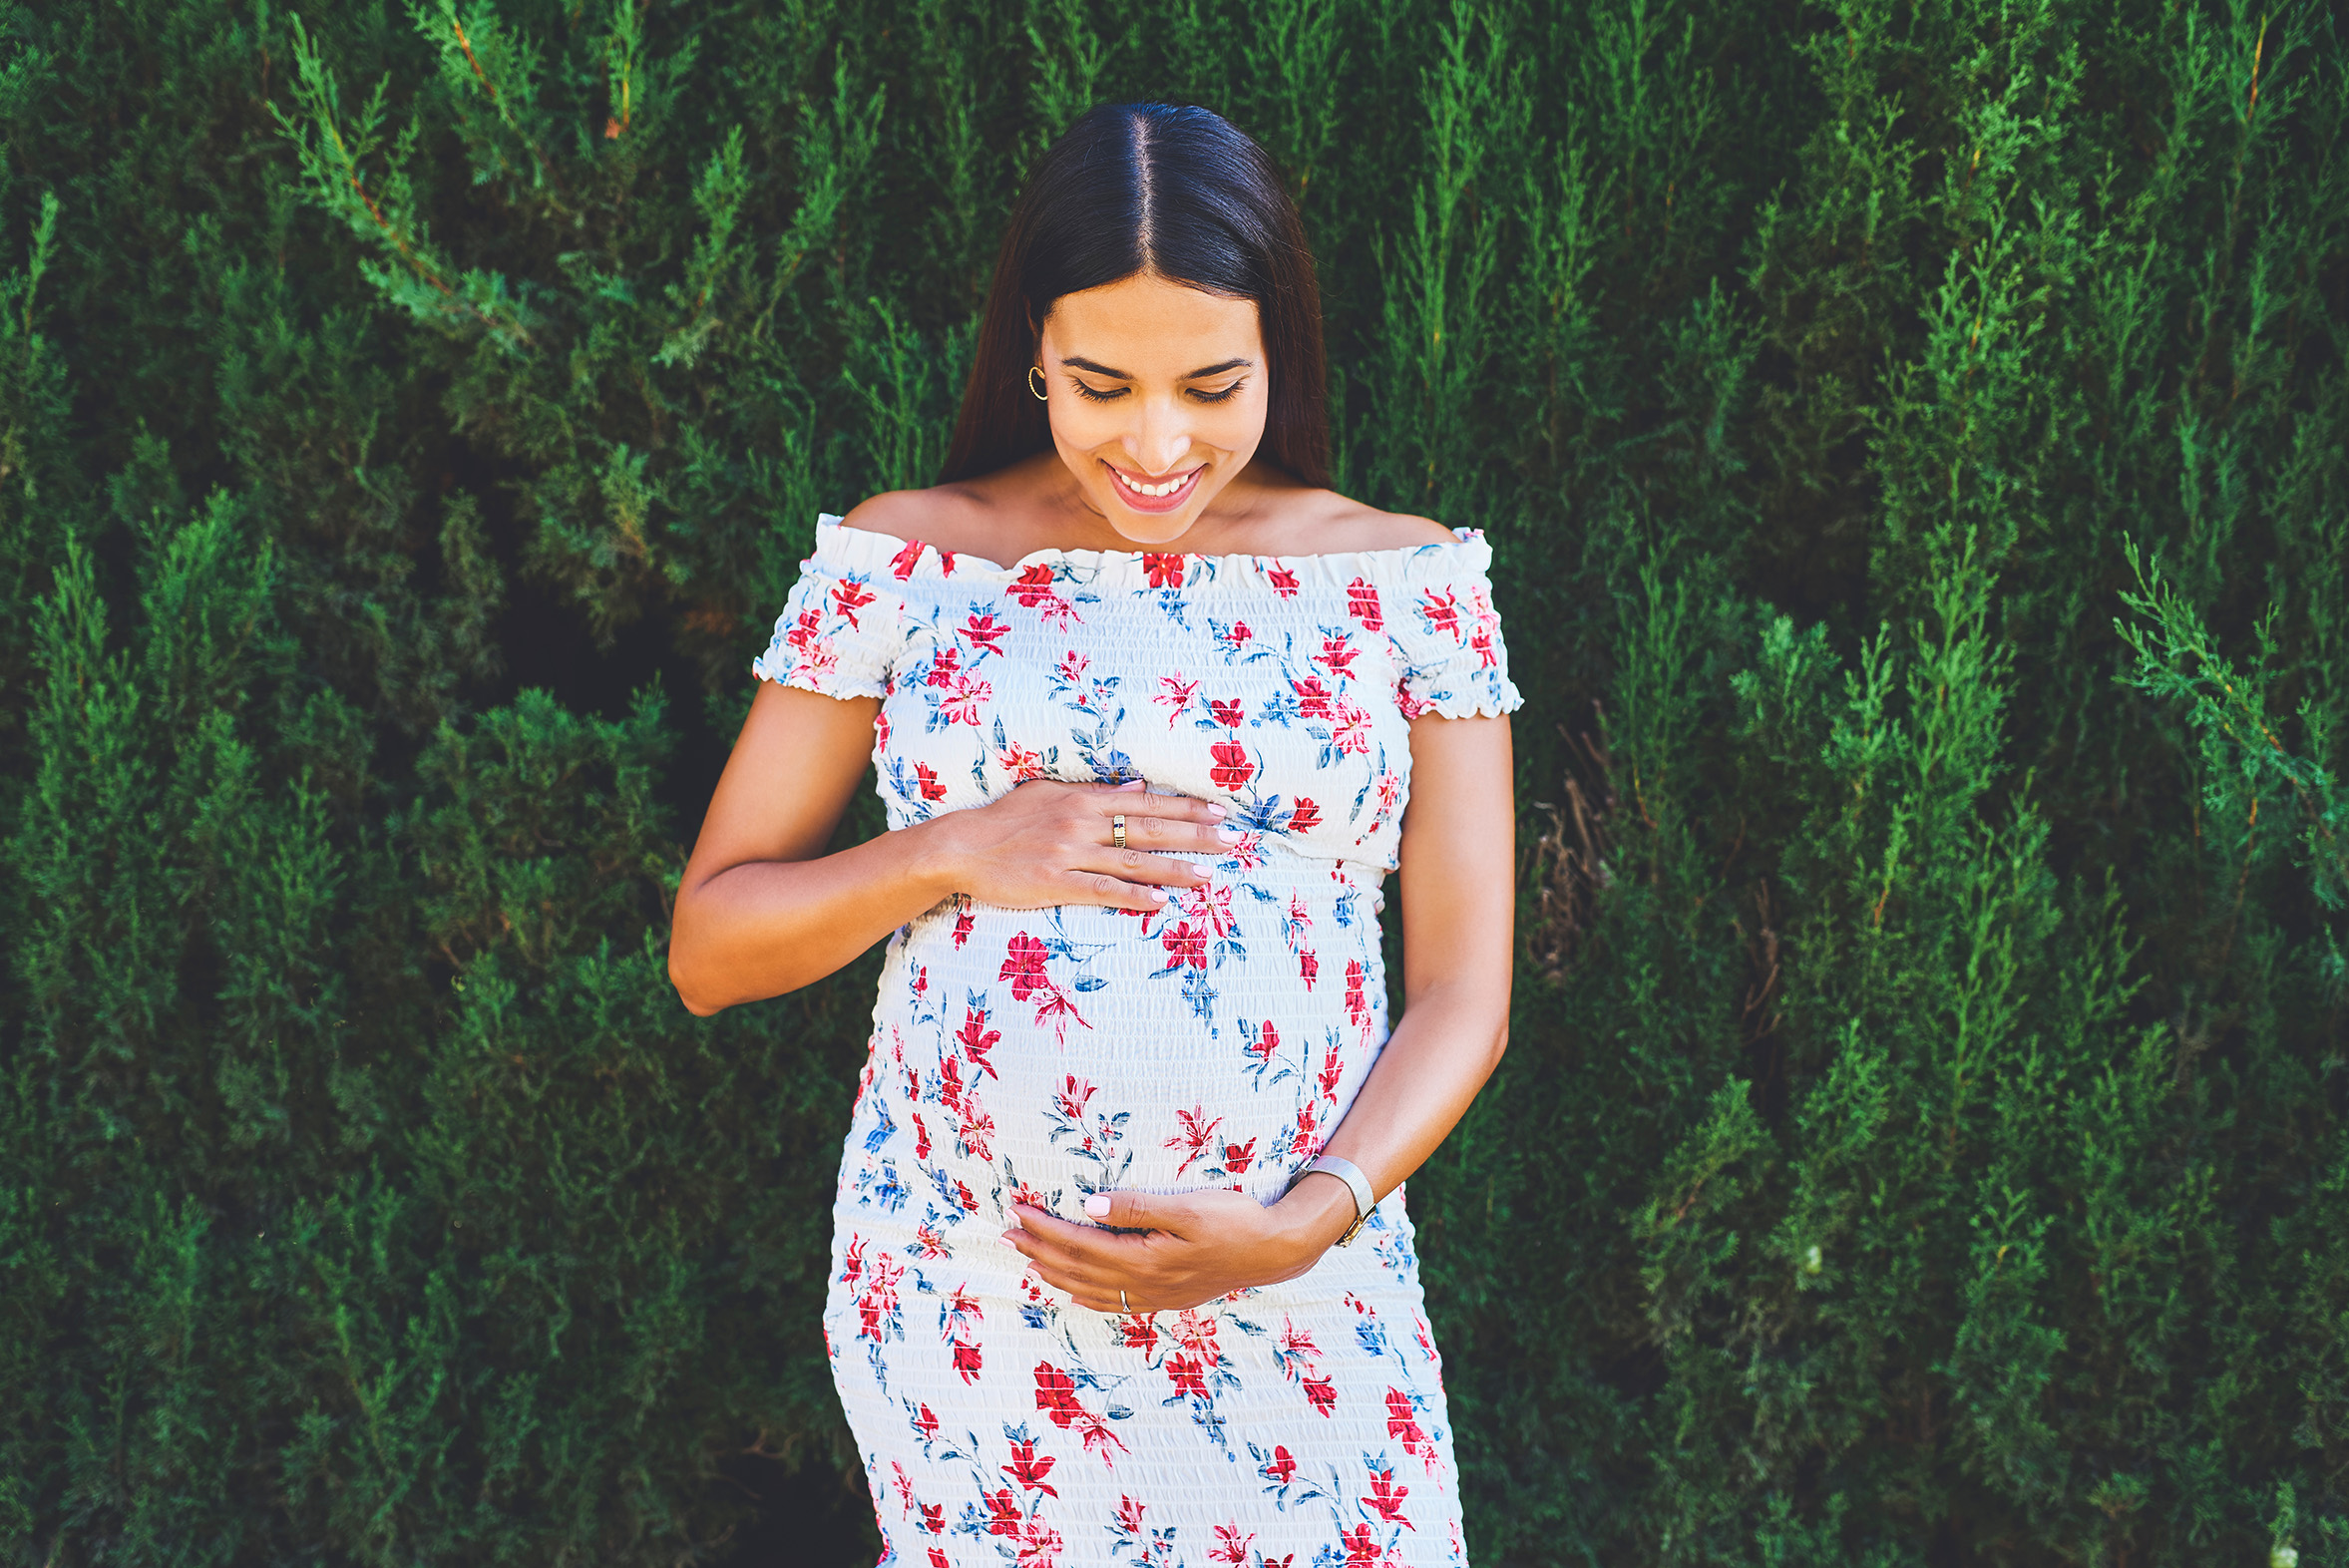 Cropped shot of a young pregnant woman posing outside against bushes in a park